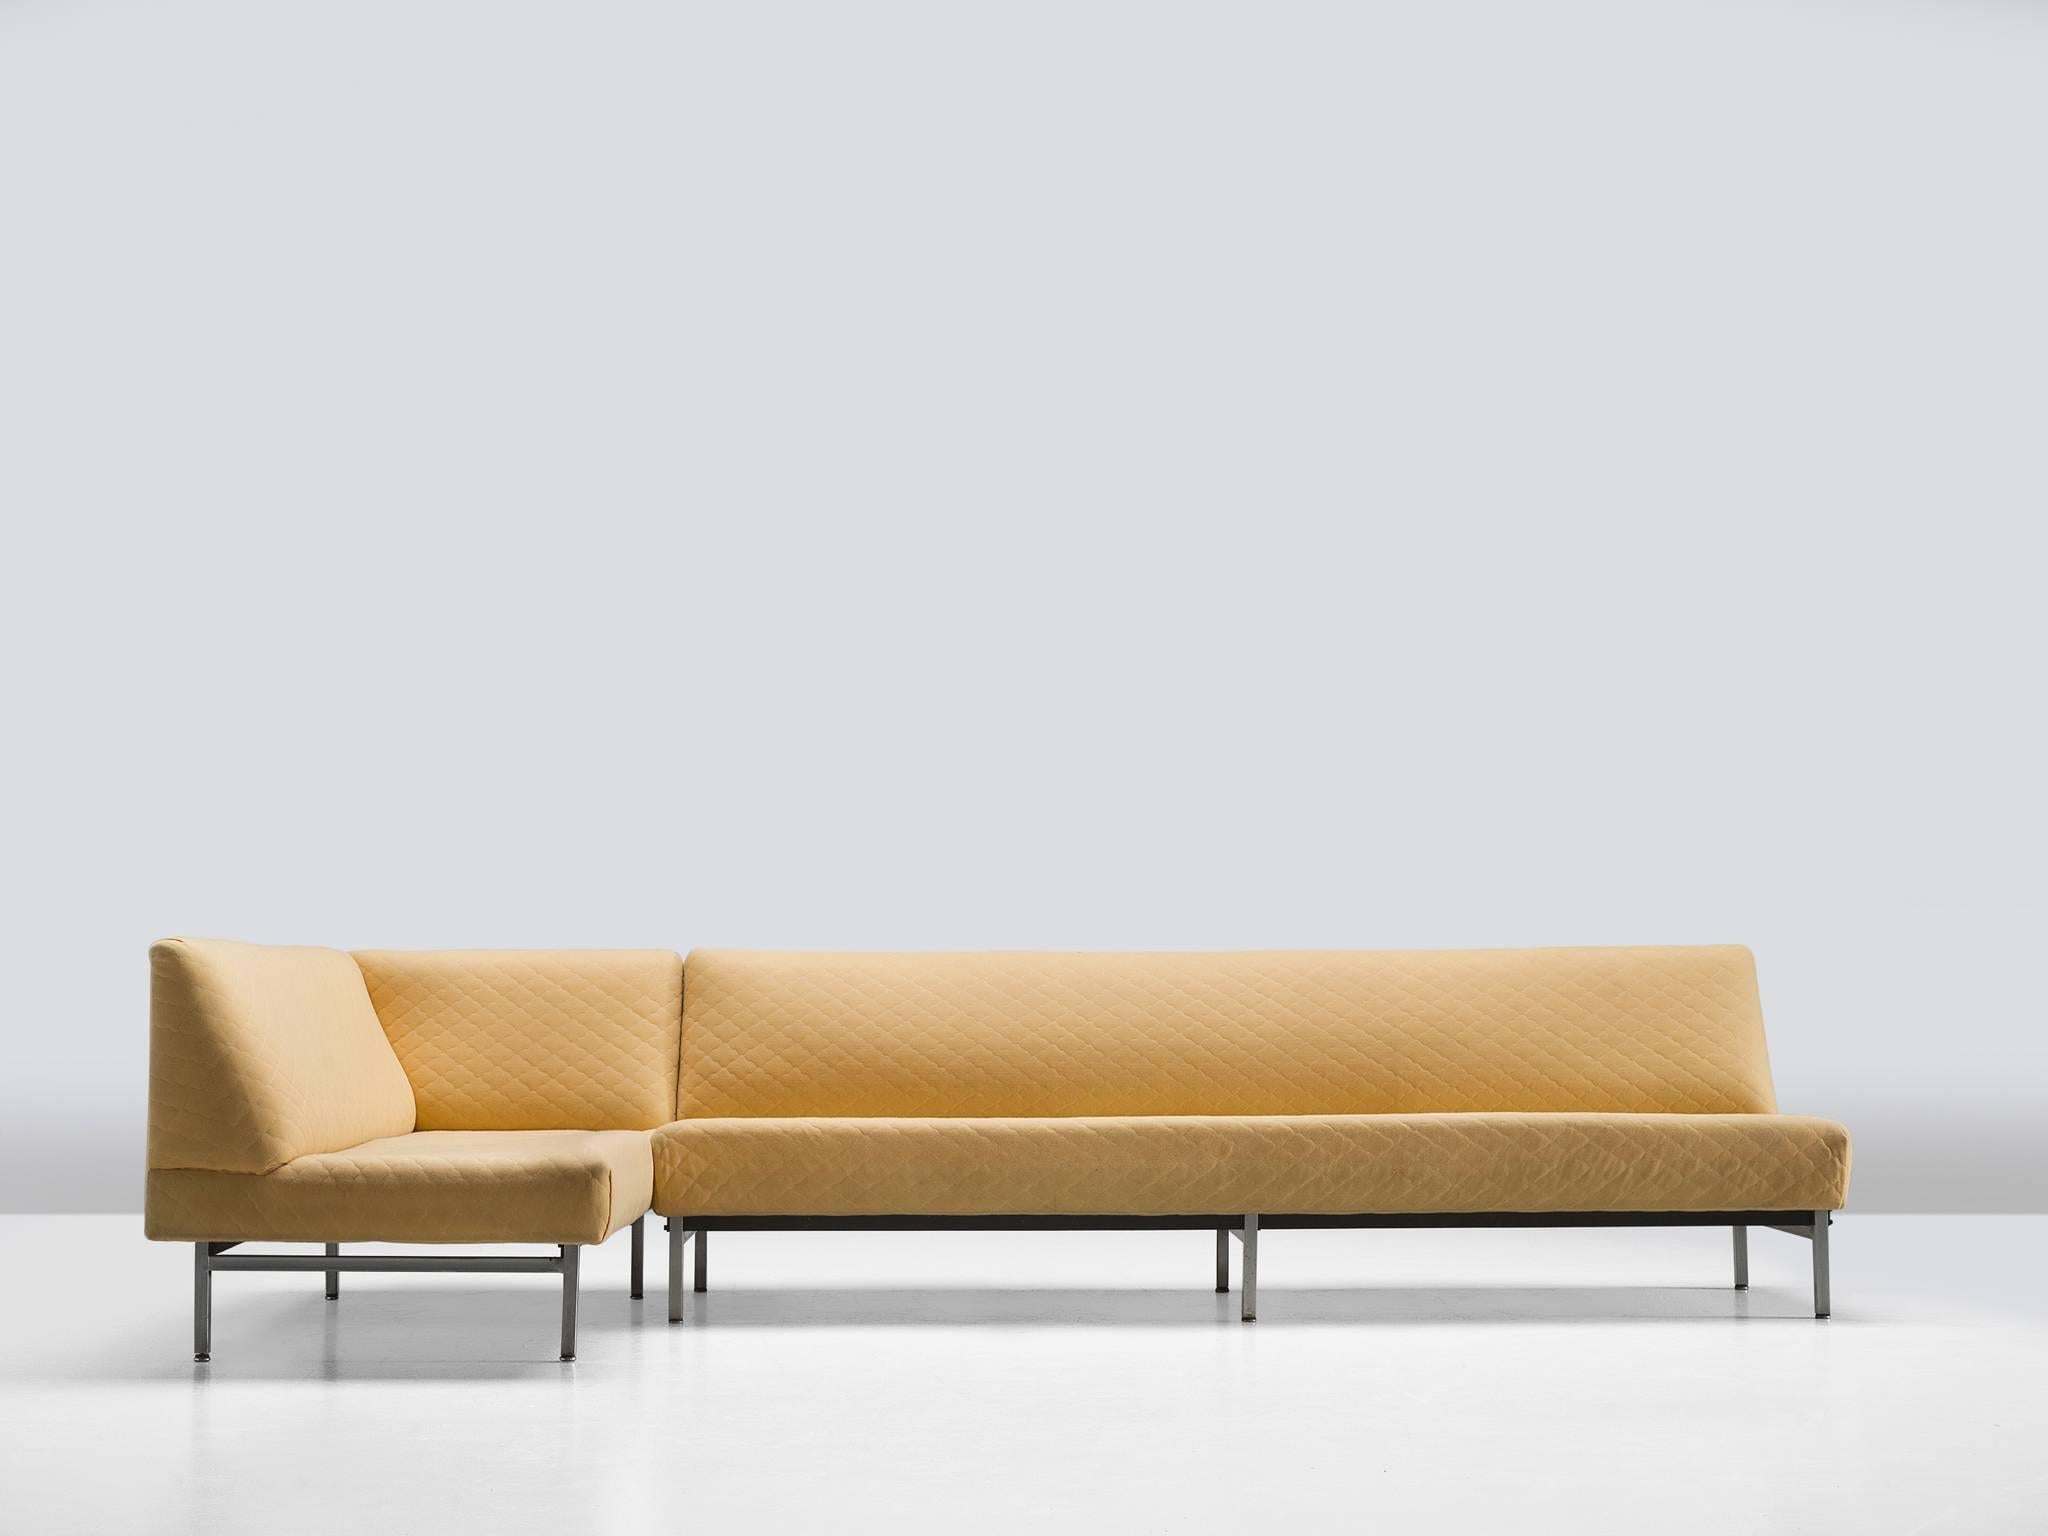 Sofa, yellow upholstery, metal, United States, 1960s

This sleek, minimalist yet comfortable sofa is both modest in its aesthetics and functional. This seemingly simple design of the seventies can be used as two separate settees as well. The corner